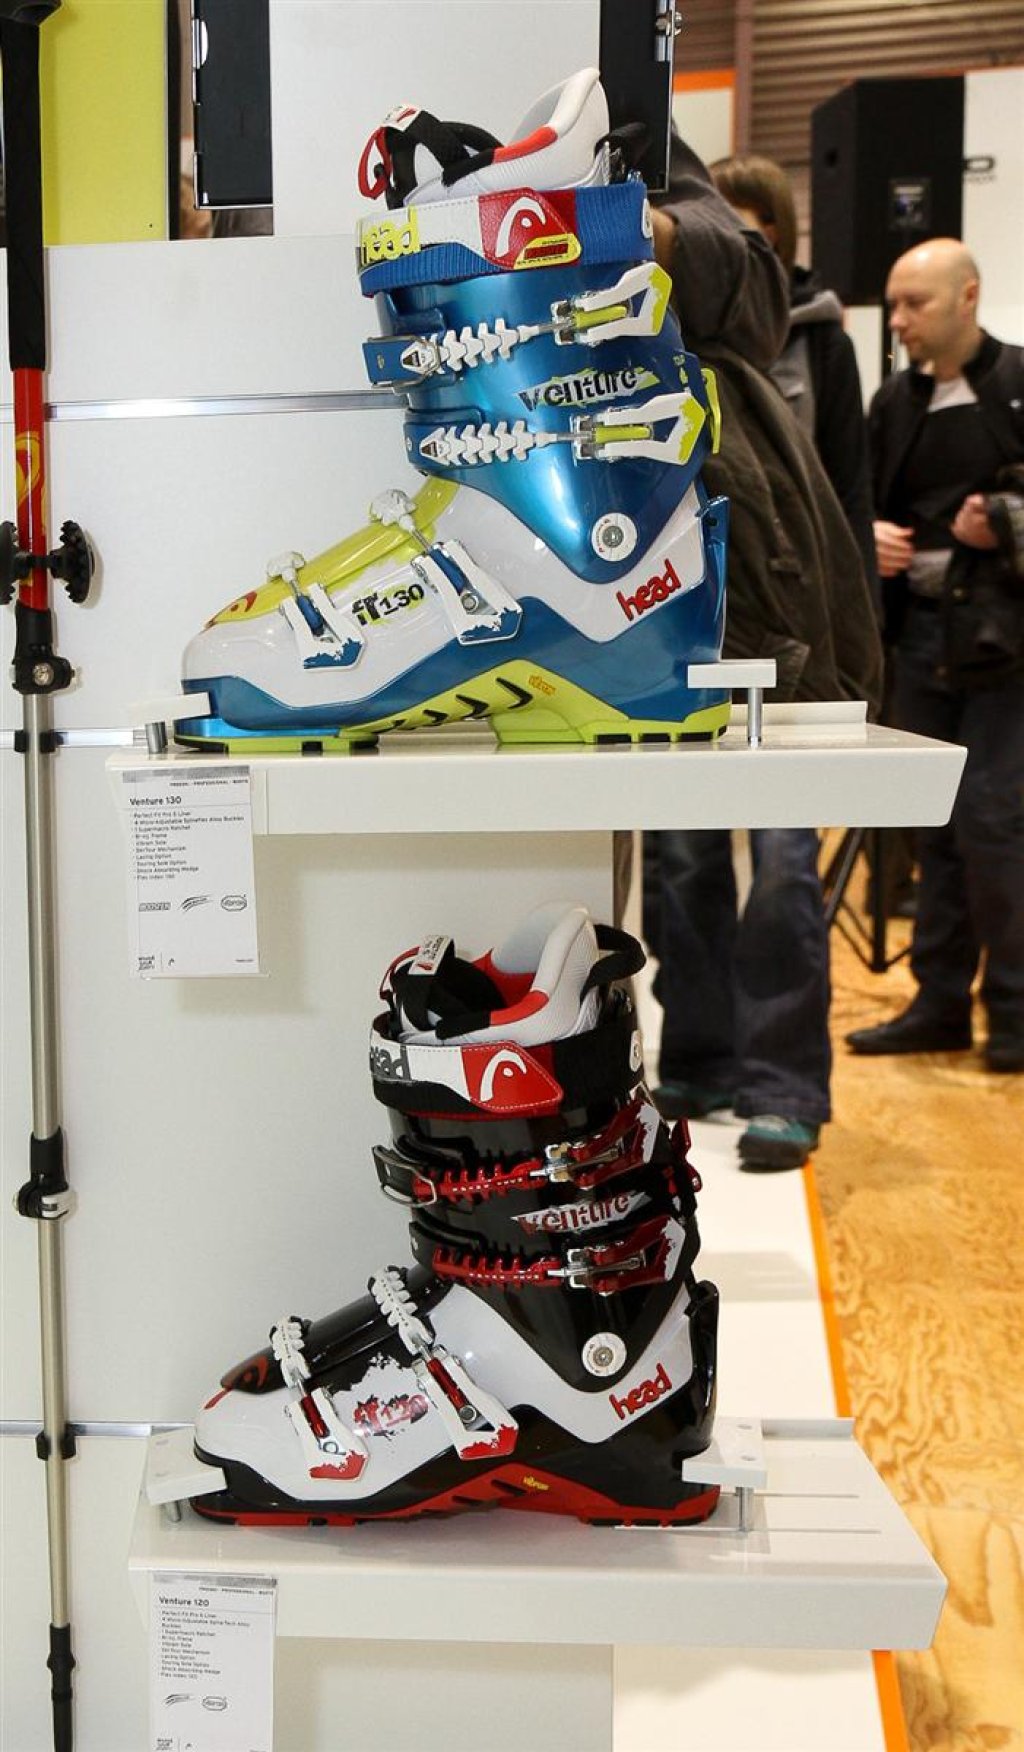 Venture 130 and 120 are the two new freeride boots from Head. The two 4-buckle boots with walking mechanism appear to be very downhill-oriented.